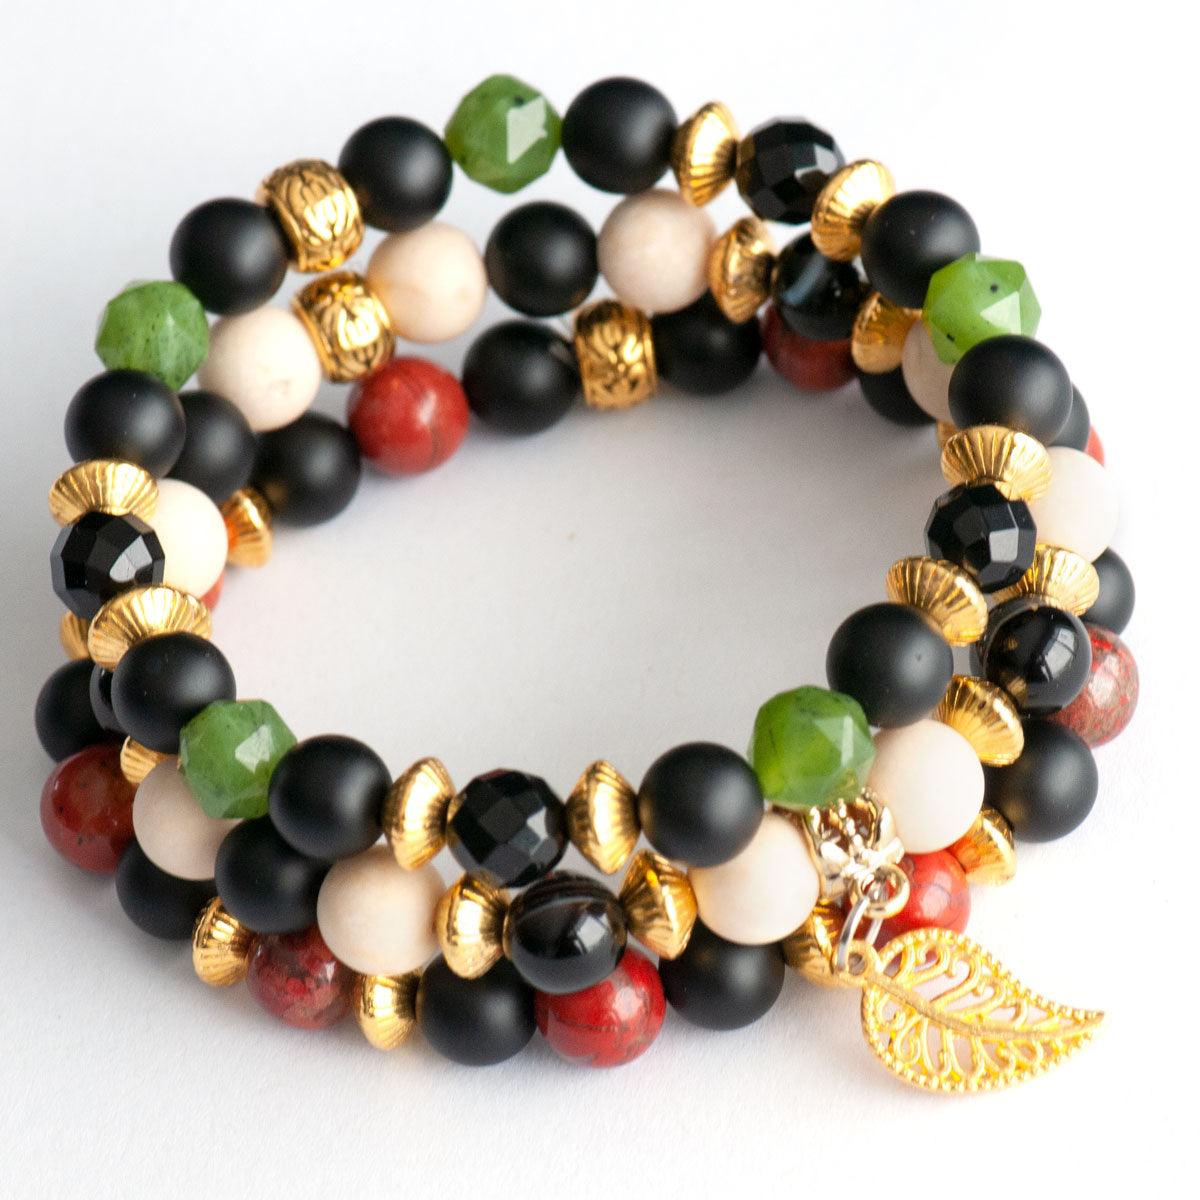 Gemstone bracelet set with gold accent beads